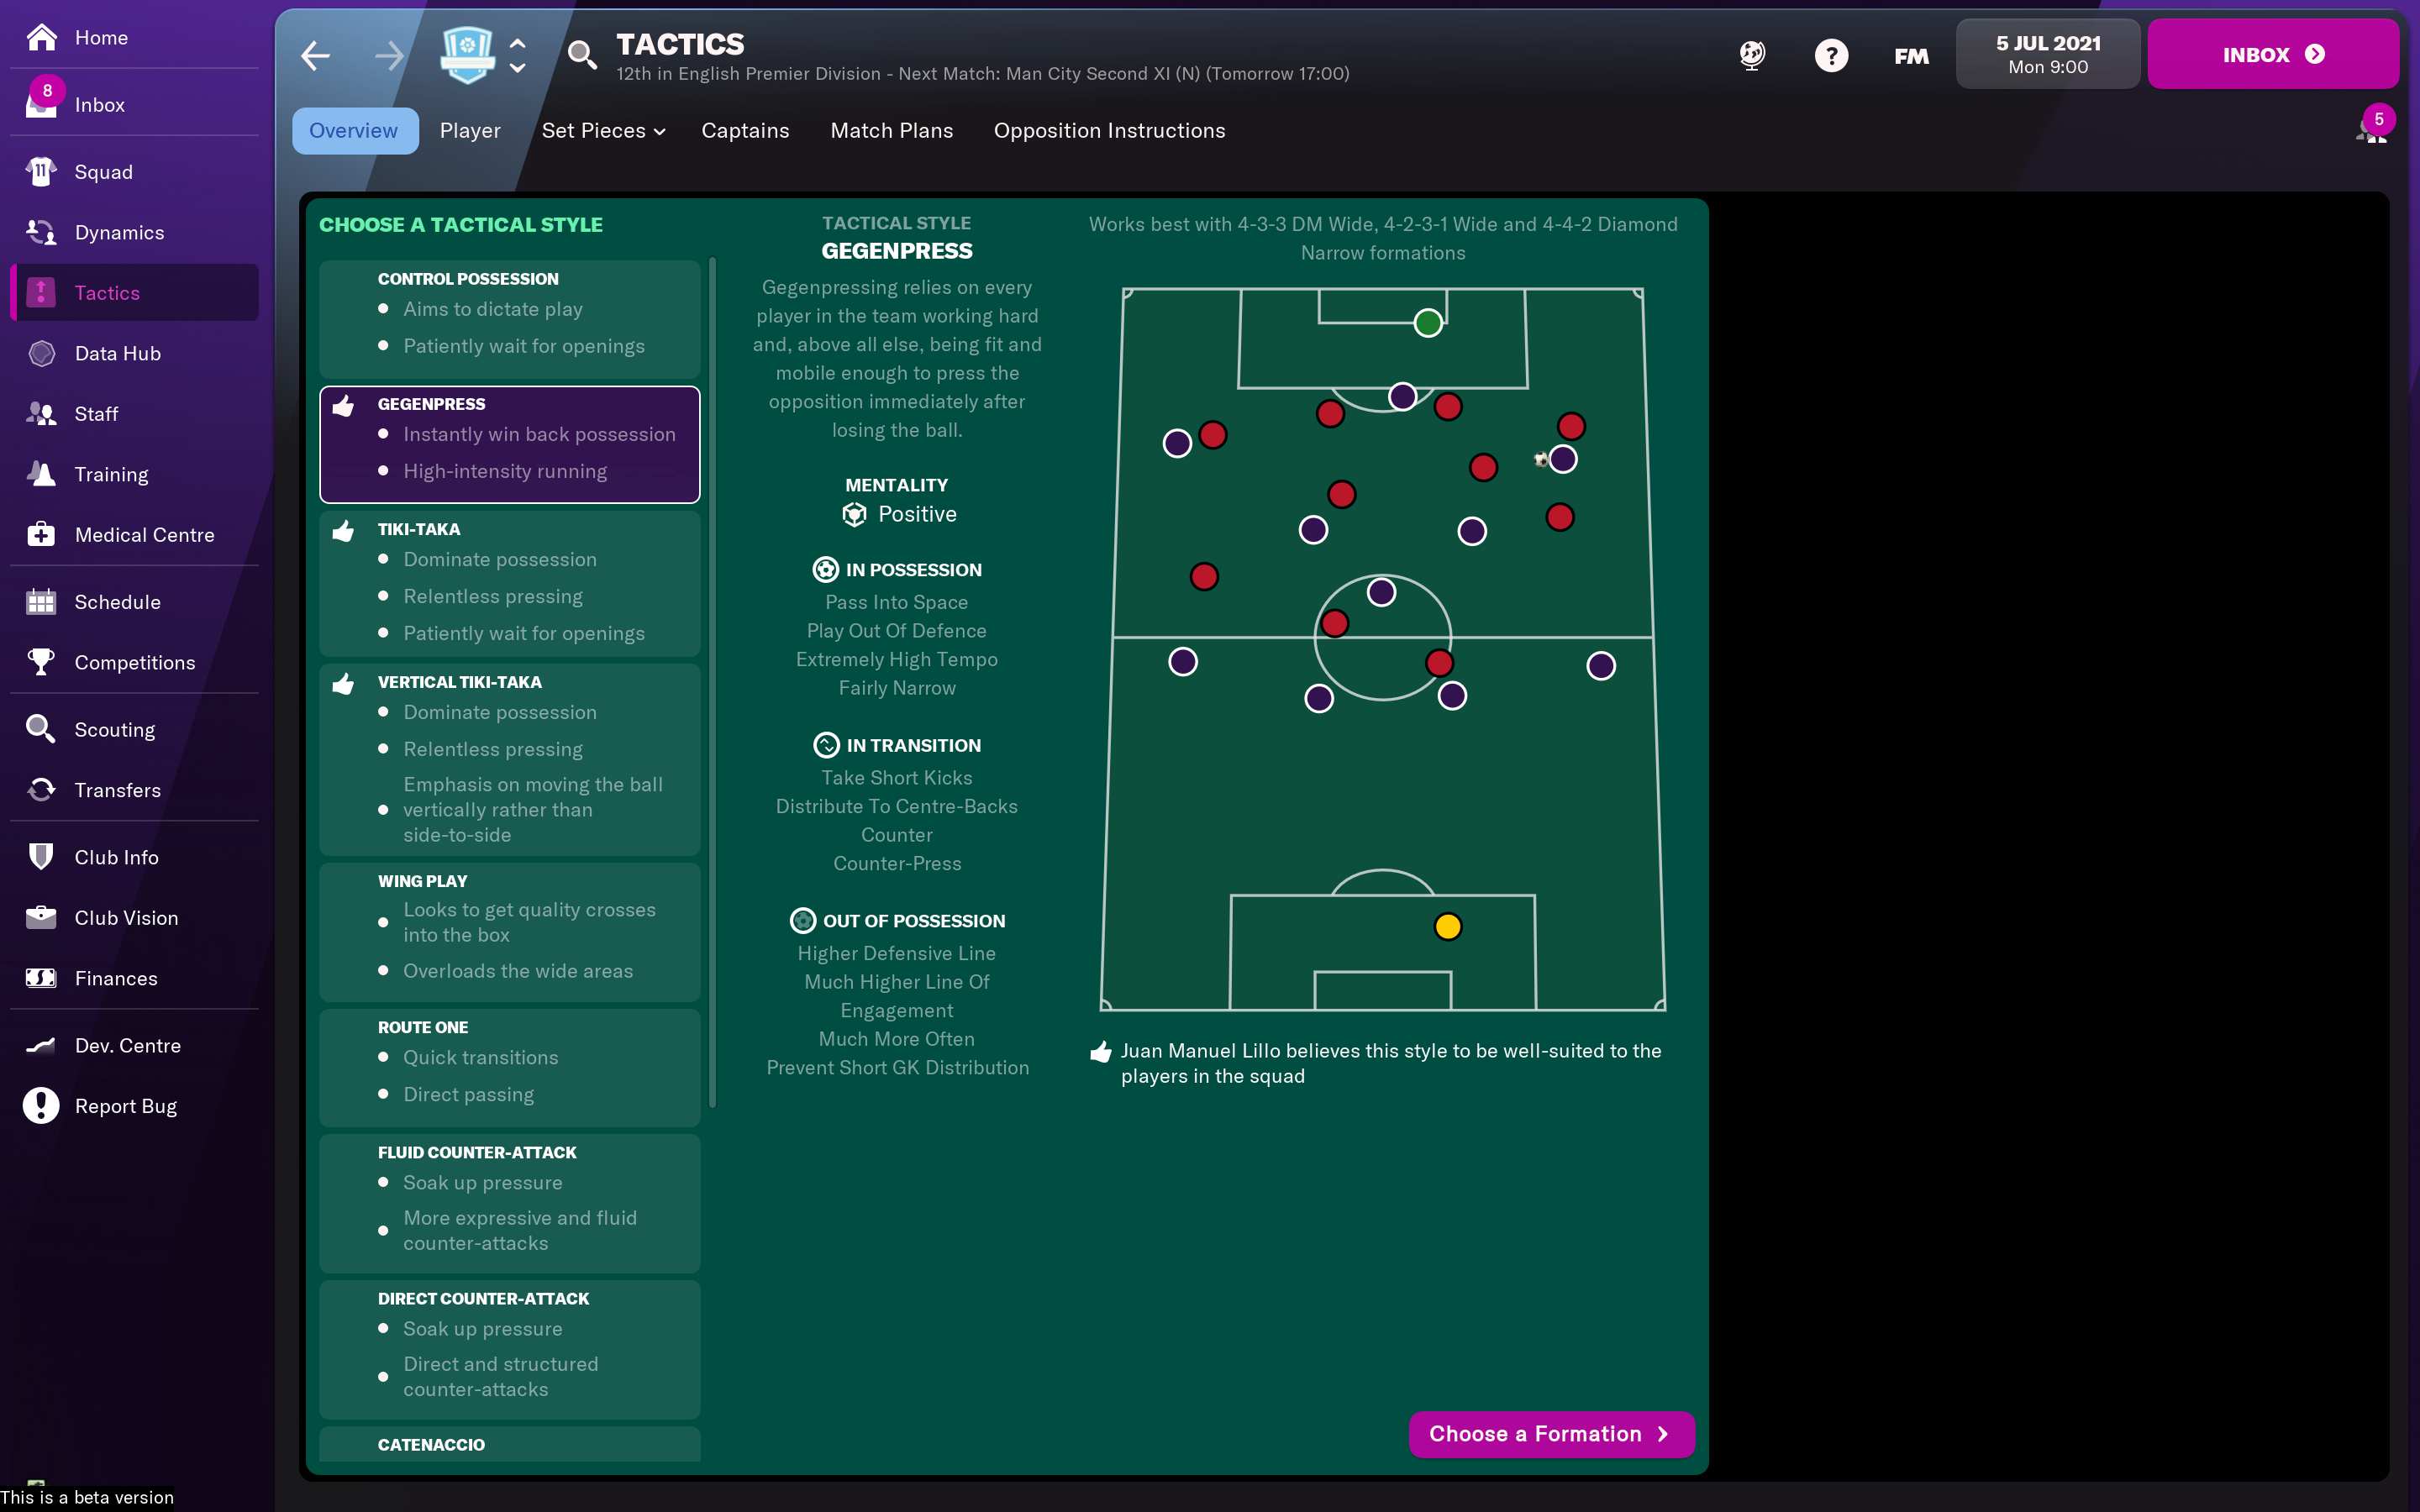 The best Football Manager 2022 tactics to win matches